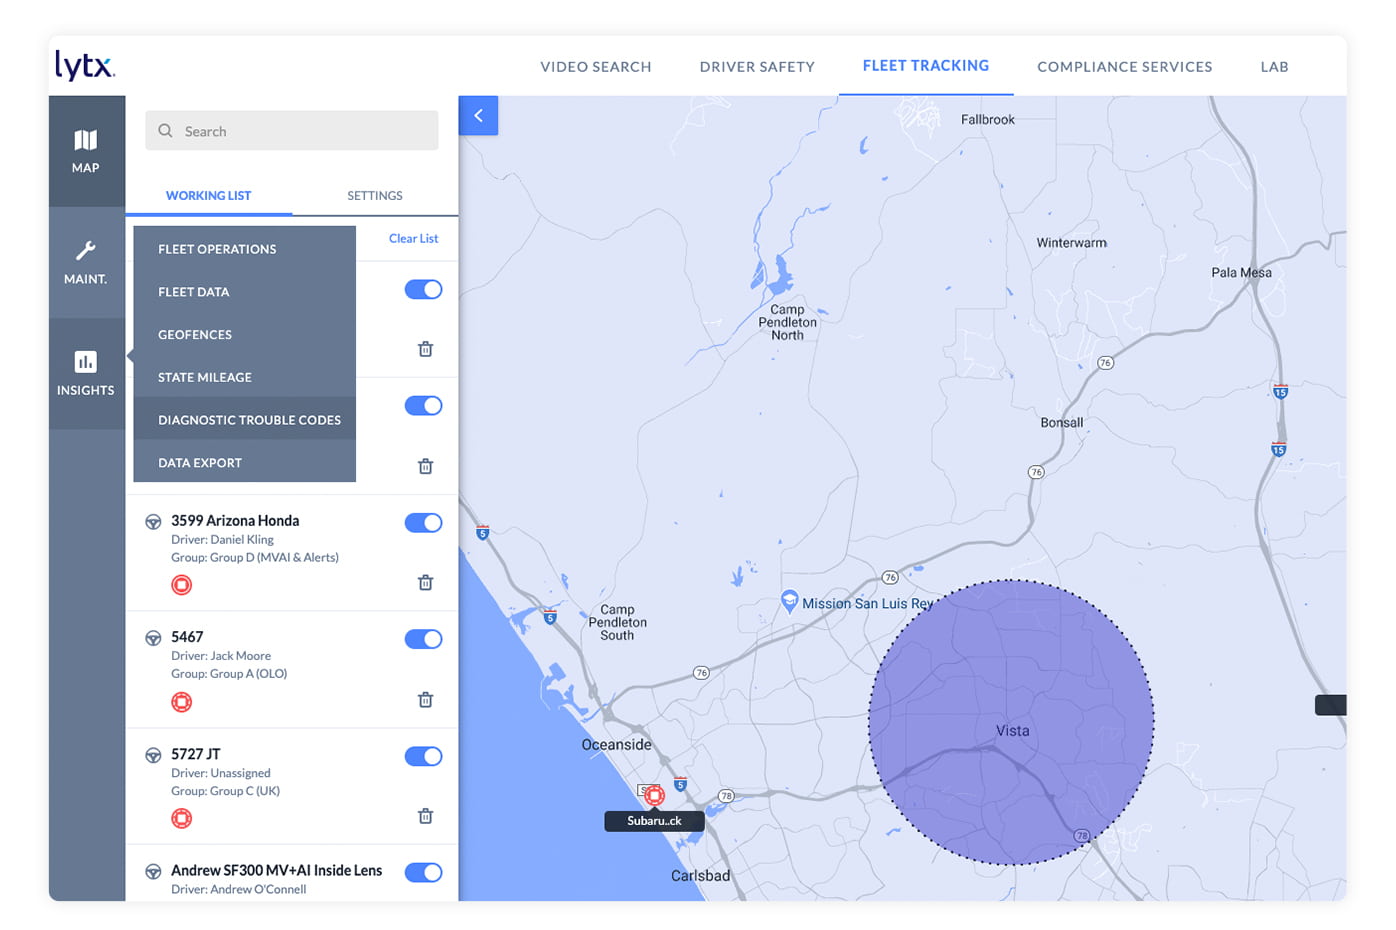 interface of Lytx fleet tracking and maintenance